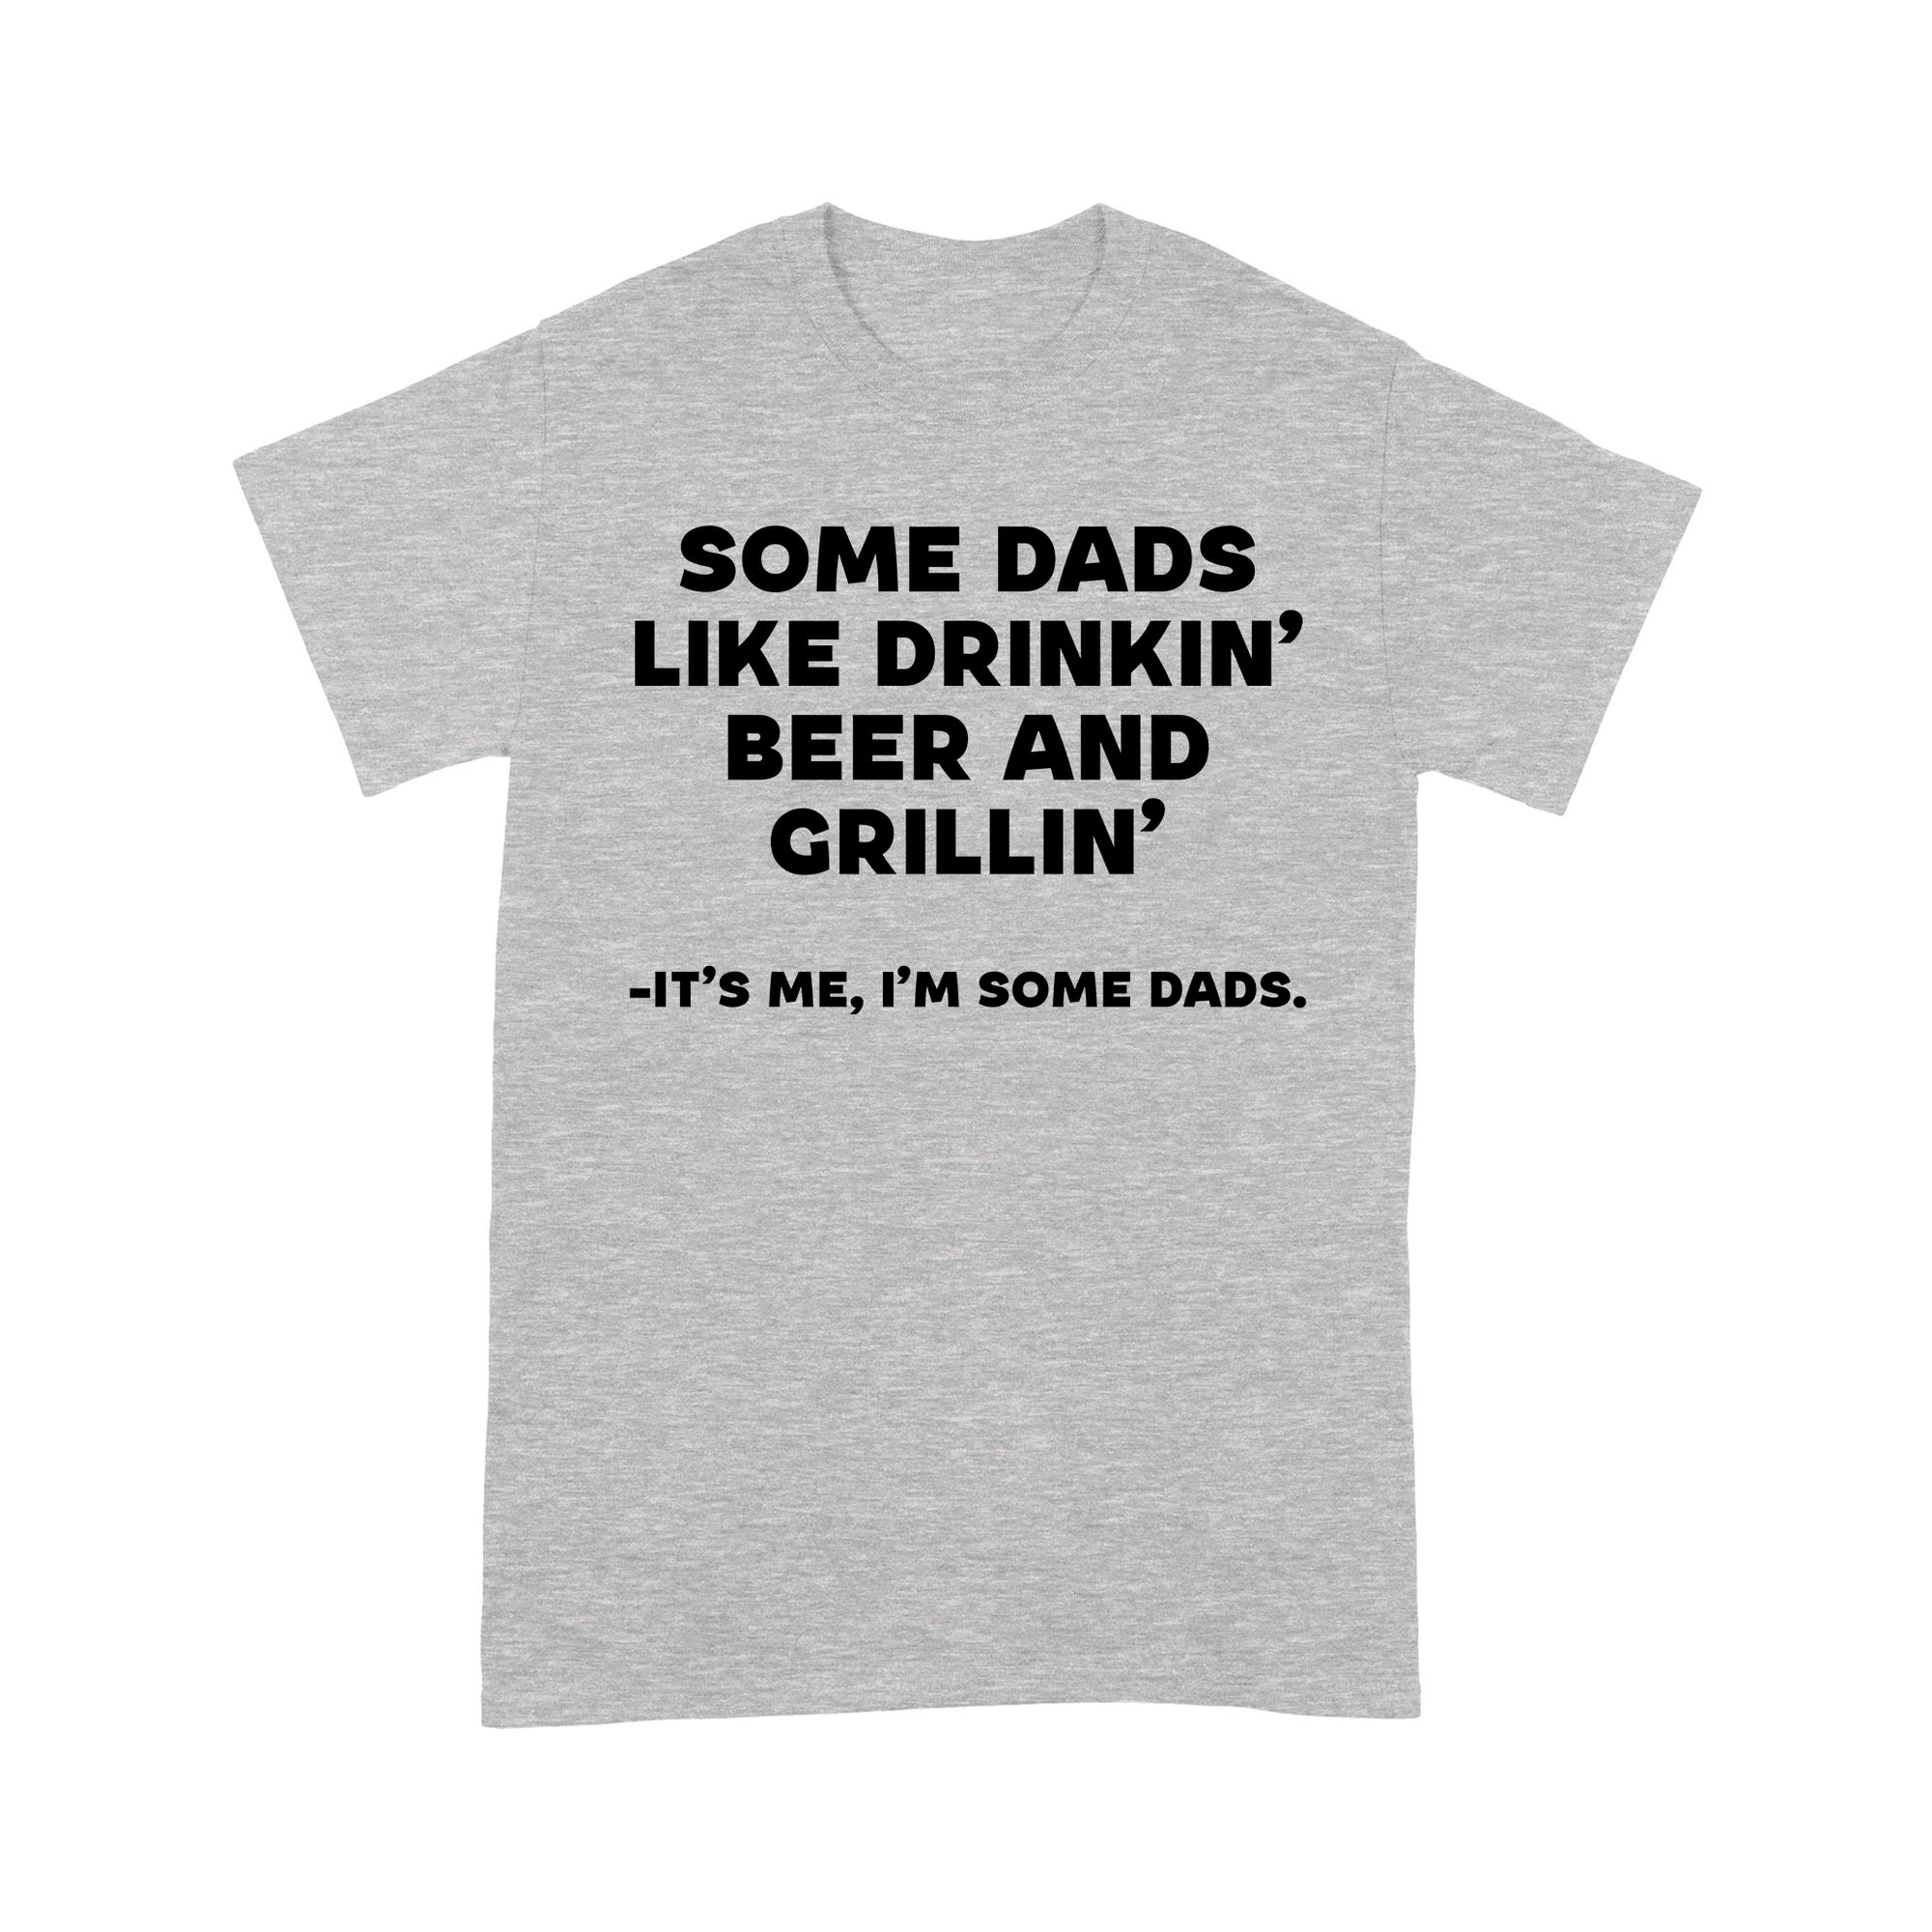 Gift Ideas for Dad Some Dads Like Drinkin Beer And Grillin It’s Me, I’m Some Dads, Father's Day Gift - Standard T-shirt